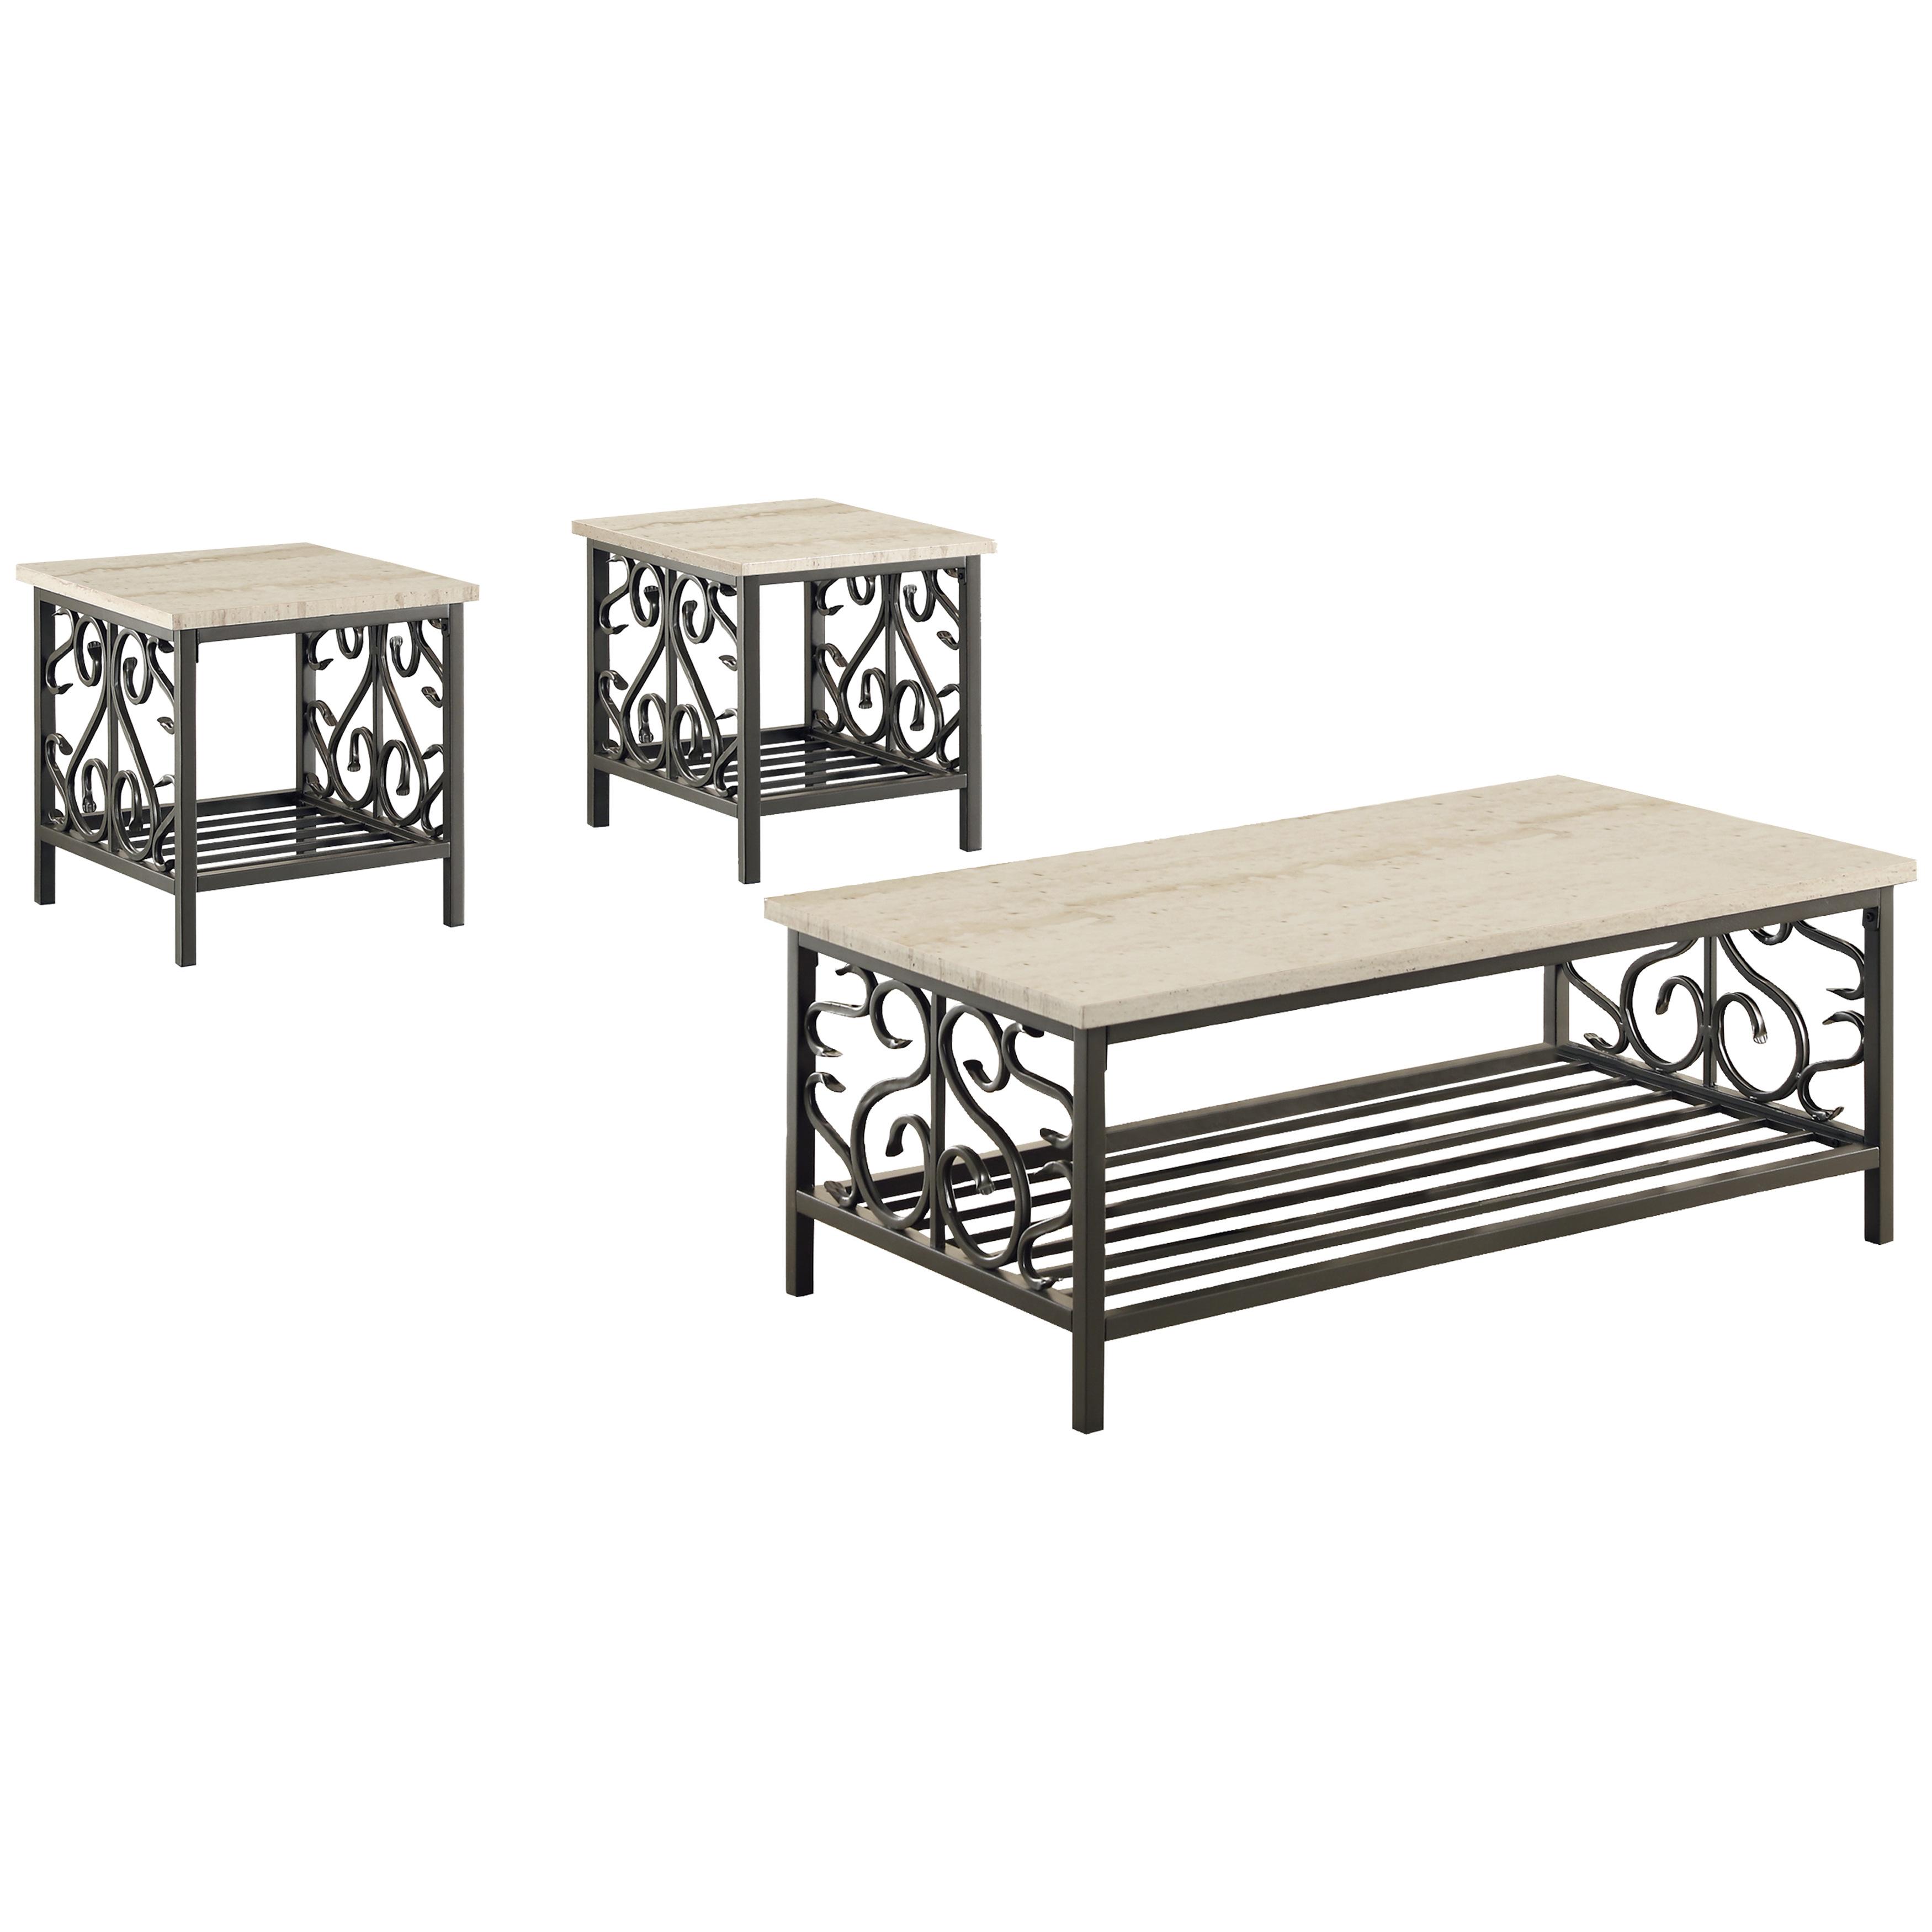 Modern, Traditional Coffee Table Set Fairhope Coffee Table Set 3PCS 3580-31 3580-31 in Gray, Black 